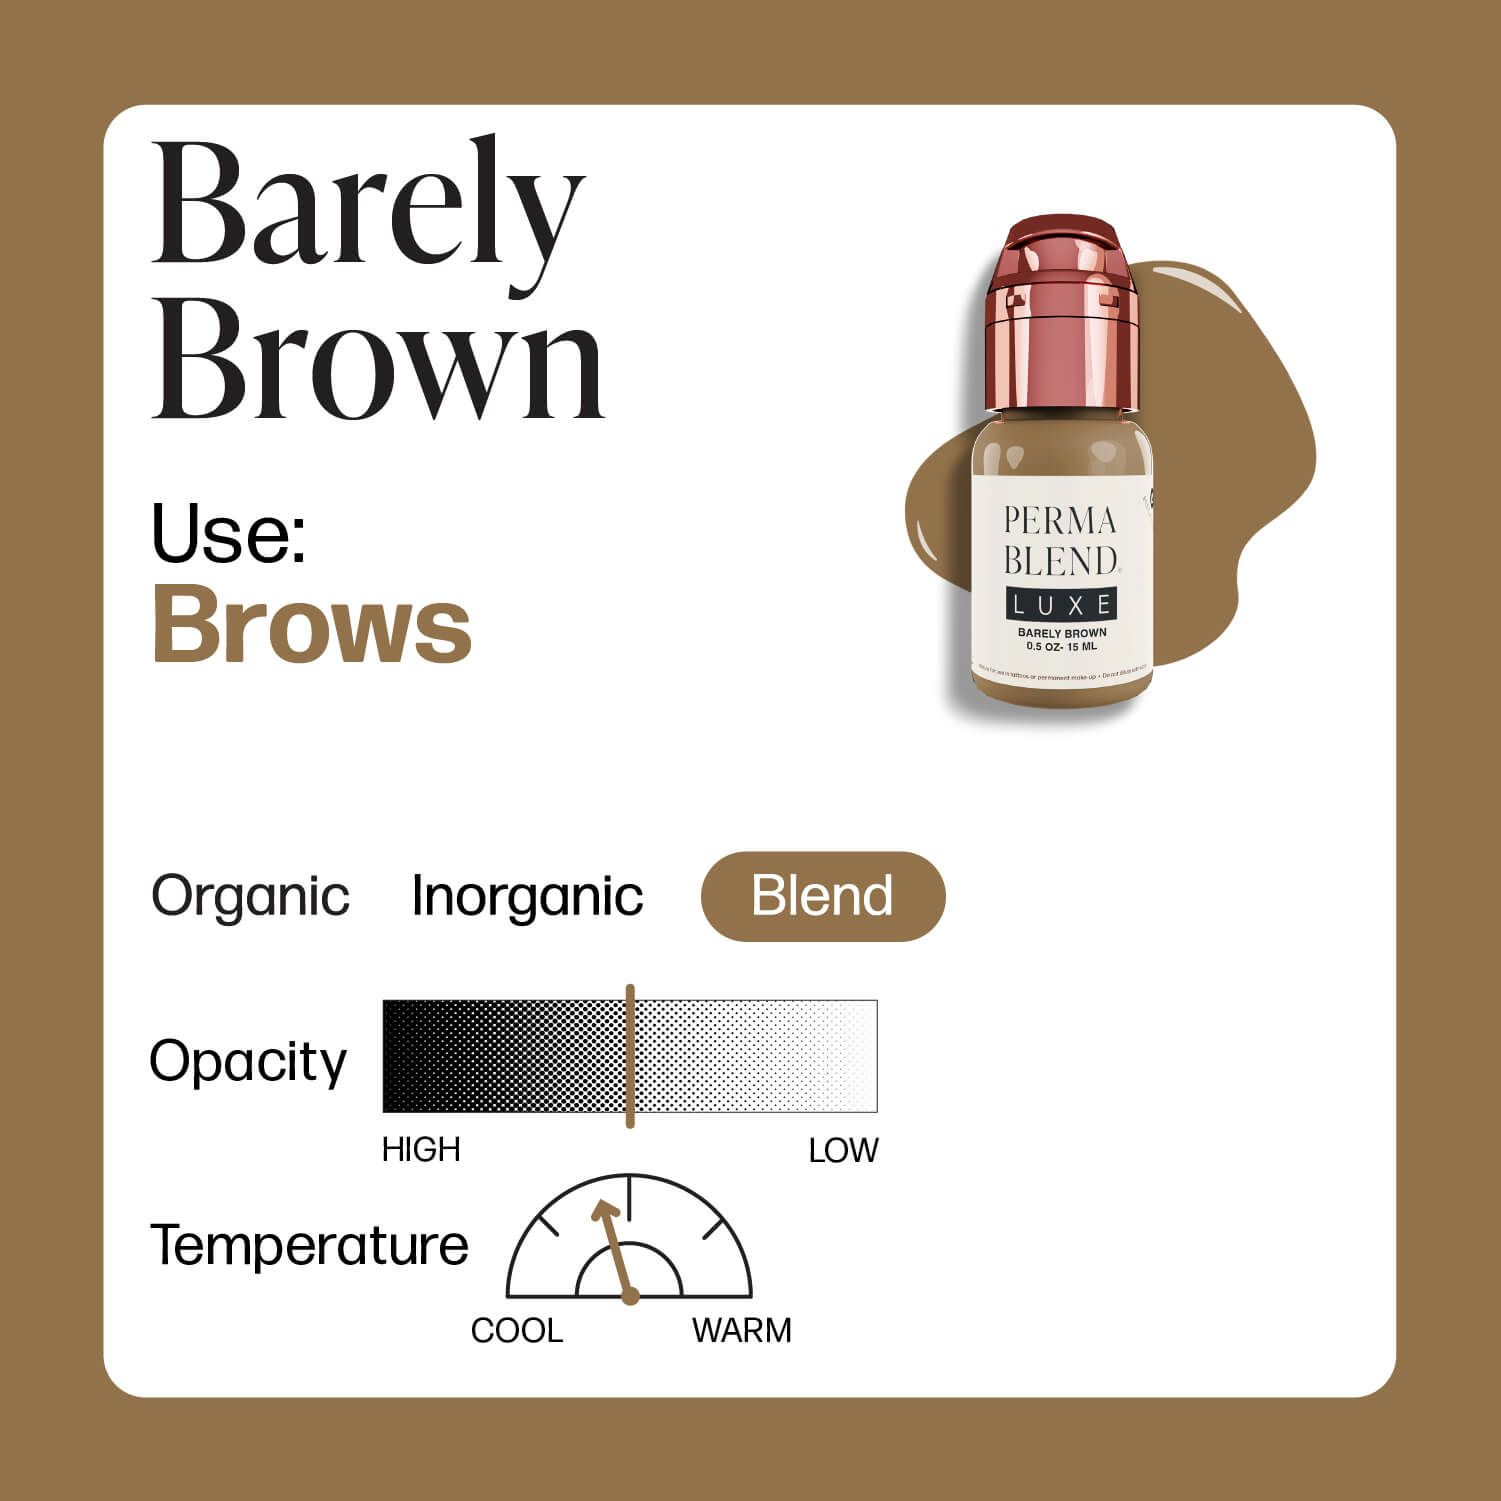 LUXE - Barely Brown